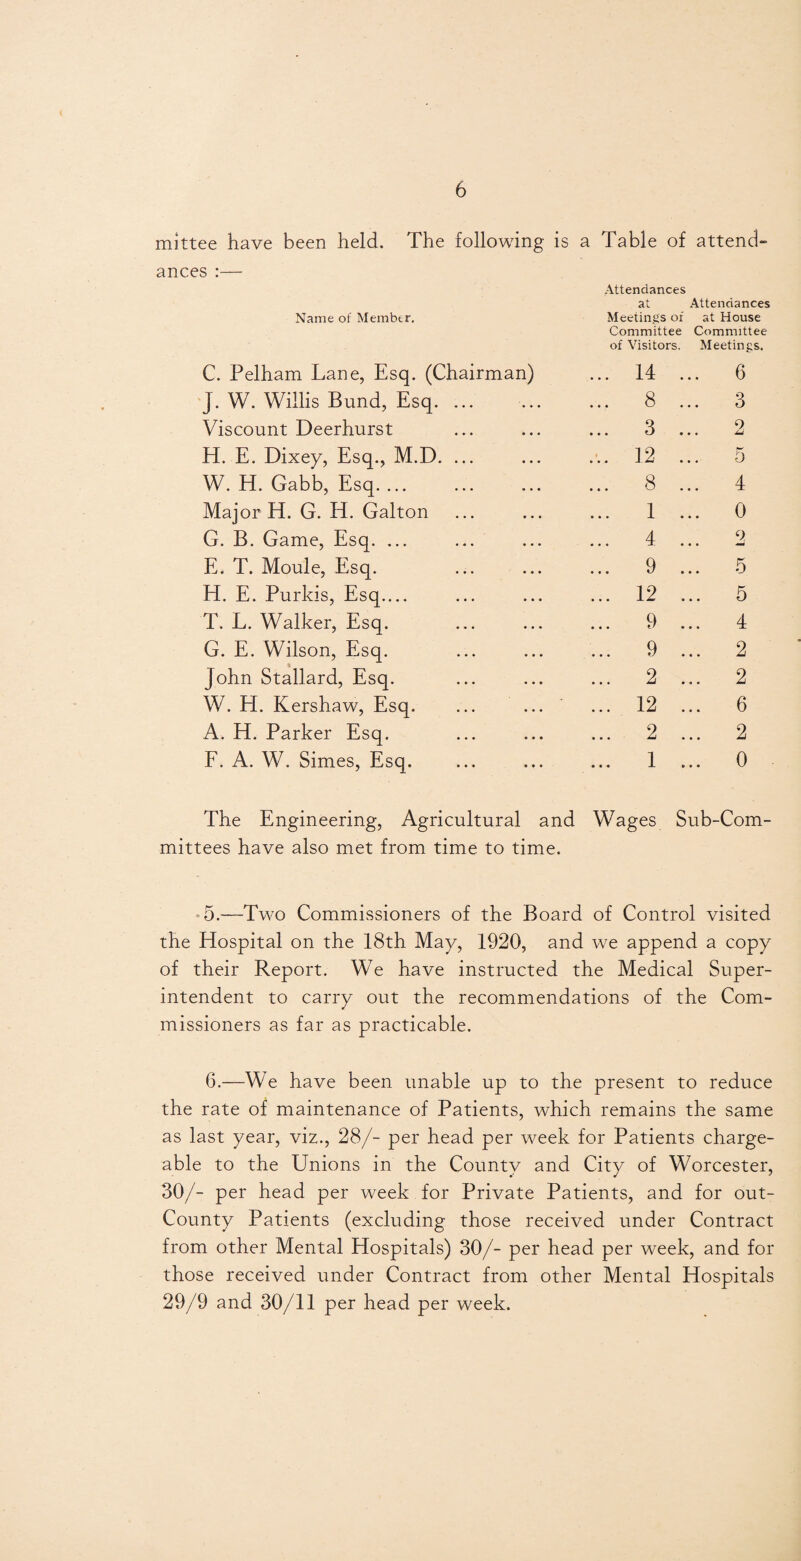 mittee have been held. The following is ances :— a Table of Attendances at attend- Attendances Name of Member. Meetings of Committee of Visitors. at House Committee Meetings. C. Pelham Lane, Esq. (Chairman) ... 14 . . 6 J. W. Willis Bund, Esq. ... ... 8 . . 3 Viscount Deerhurst ... 3 . 9 H. E. Dixey, Esq., M.D. ... ... 12 . 5 W. H. Gabb, Esq. ... 8 . . 4 Major H. G. H. Galton ... 1 . . 0 G. B. Game, Esq. ... ... 4 . 9. • -M E. T. Moule, Esq. ... 9 . . 5 H. E. Purkis, Esq.... ... 12 . . 5 T. L. Walker, Esq. ... 9 . . 4 G. E. Wilson, Esq. ... 9 . . 2 John Stallard, Esq. ... 2 . . 2 W. H. Kershaw, Esq. ... 12 . . 6 A. H. Parker Esq. ... 2 . . 2 F. A. W. Simes, Esq. ... 1 . . 0 The Engineering, Agricultural and Wages Sub-Com¬ mittees have also met from time to time. 5. —Two Commissioners of the Board of Control visited the Hospital on the 18th May, 1920, and we append a copy of their Report. We have instructed the Medical Super¬ intendent to carry out the recommendations of the Com¬ missioners as far as practicable. 6. —We have been unable up to the present to reduce the rate of maintenance of Patients, which remains the same as last year, viz., 28/- per head per week for Patients charge¬ able to the Unions in the County and City of Worcester, 30/- per head per week for Private Patients, and for out- County Patients (excluding those received under Contract from other Mental Hospitals) 30/- per head per week, and for those received under Contract from other Mental Hospitals 29/9 and 30/11 per head per week.